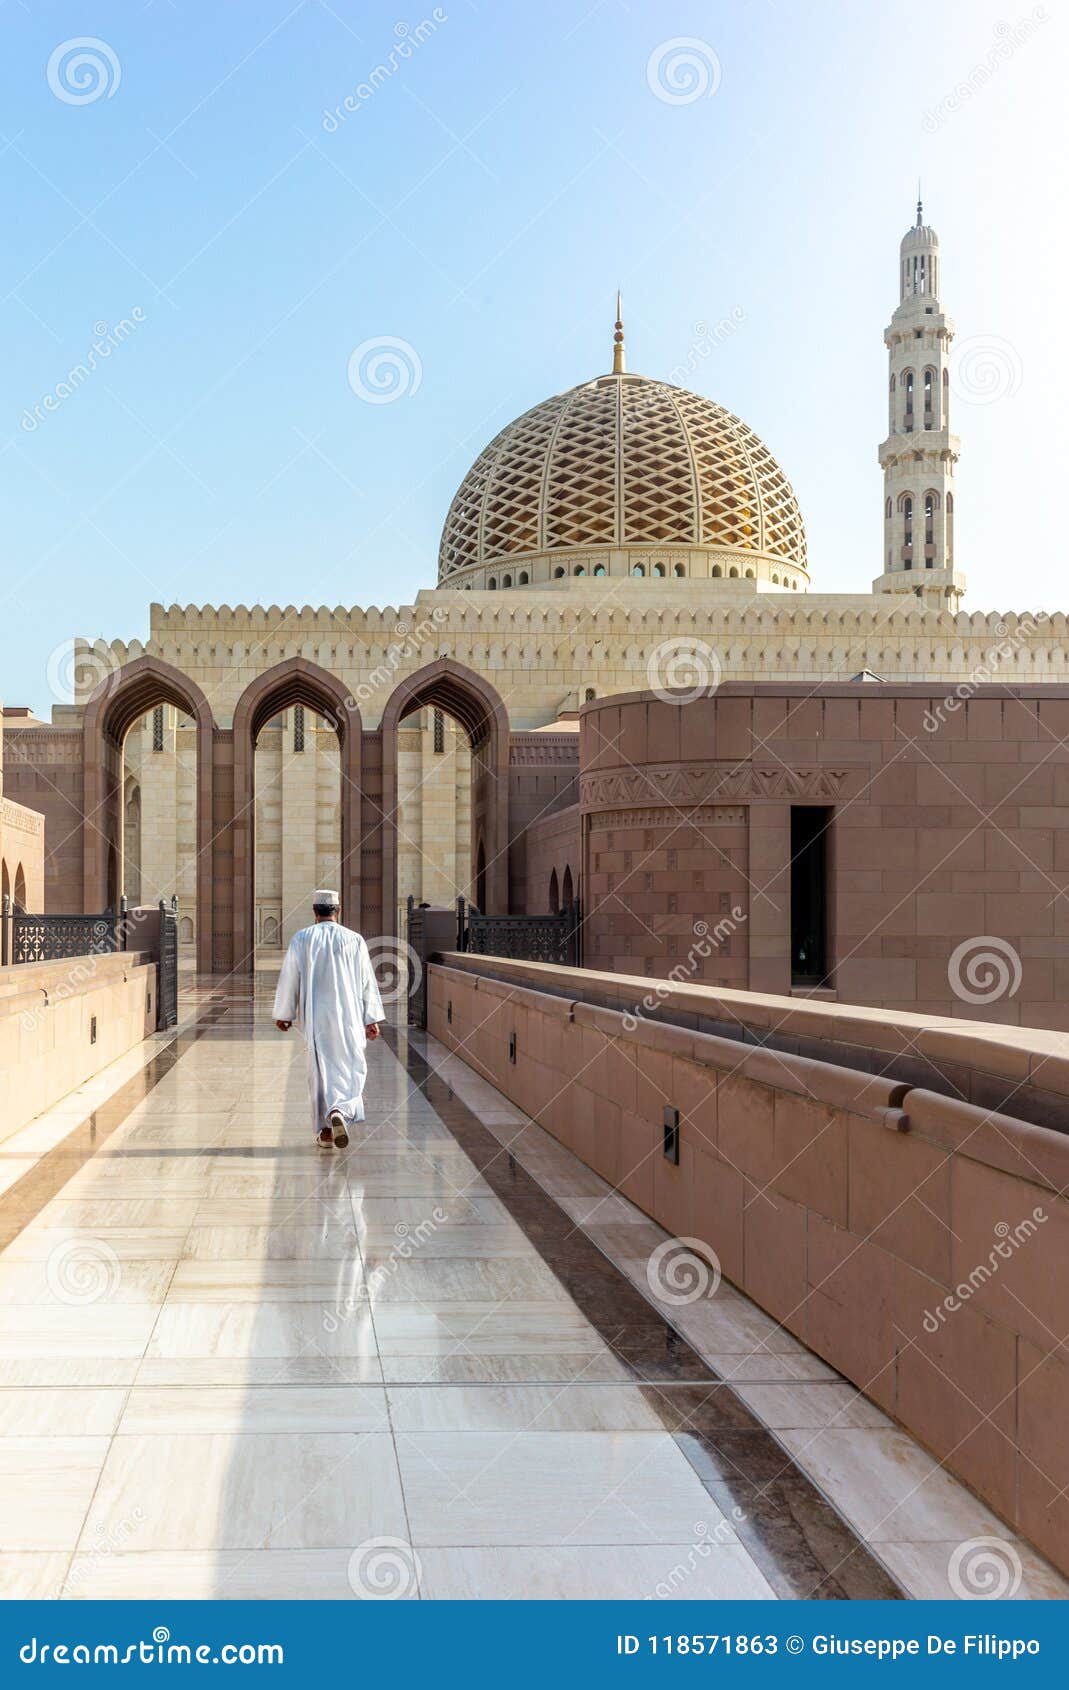 A Prayer on His Way To the Muscat Grand Mosque in the Typical Om